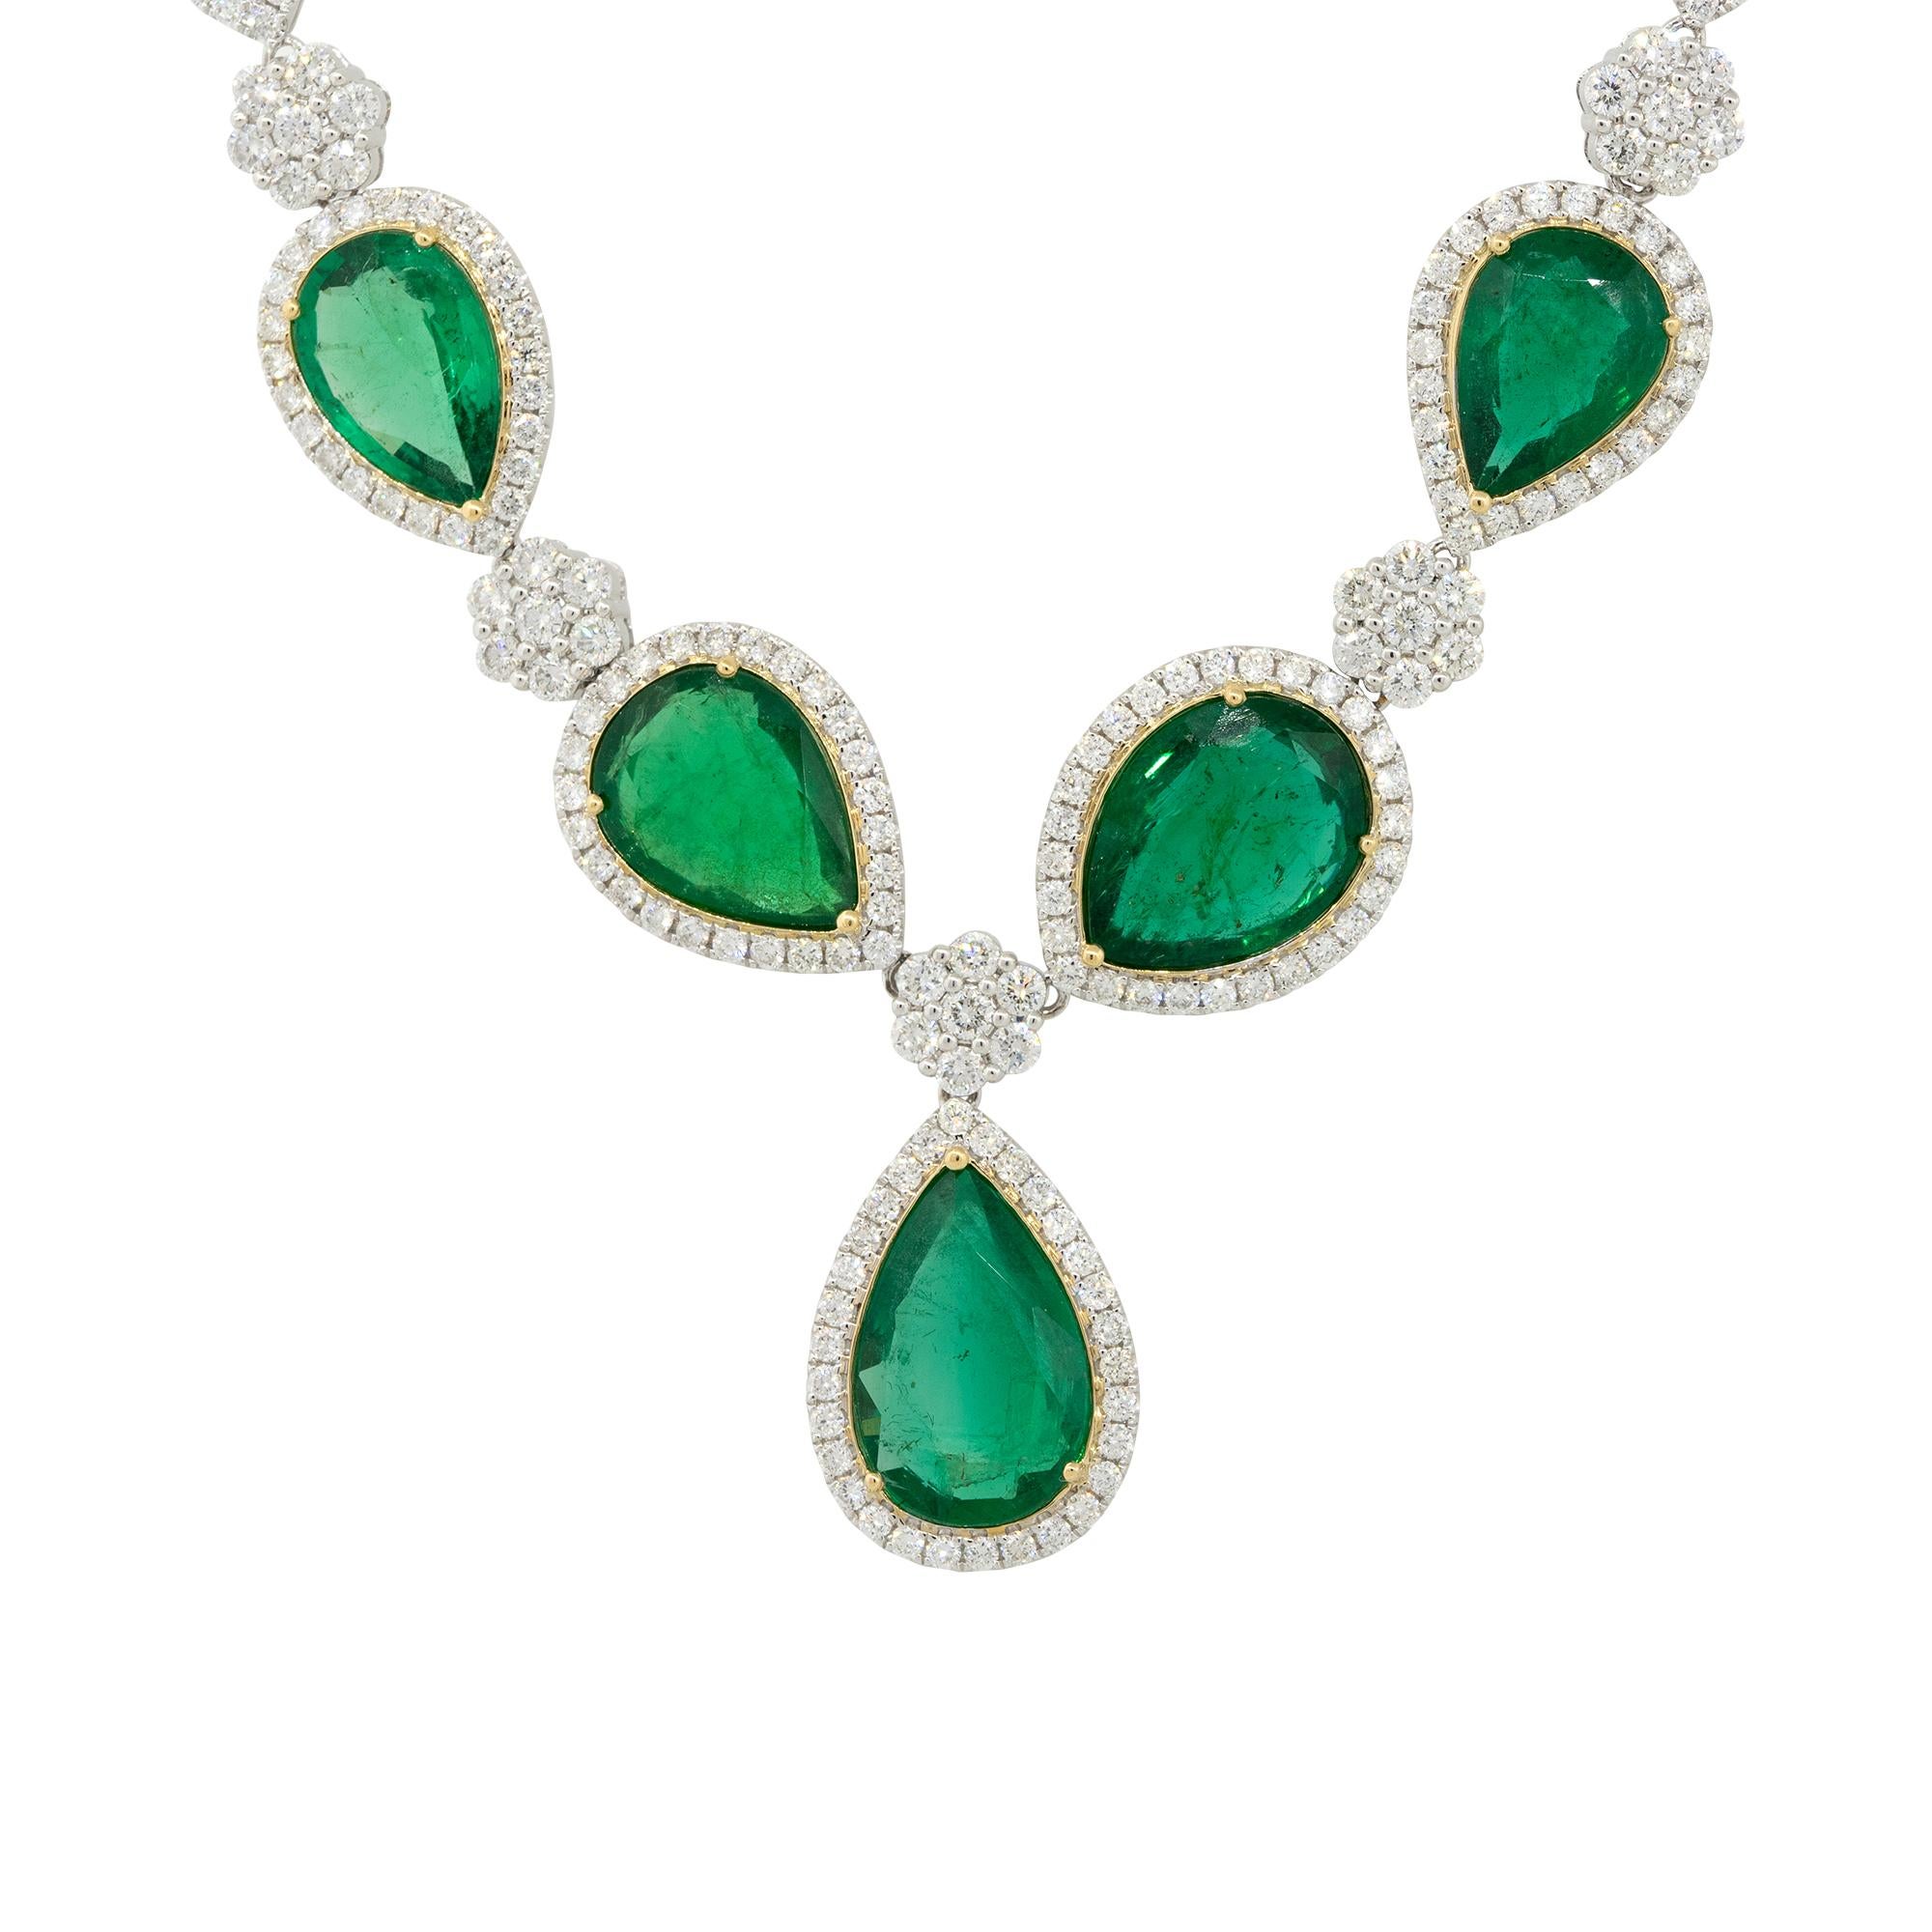 18 Karat White and Yellow Gold 19.39 Carat Pear Shaped Emerald and Diamond Drop Necklace 

Material: 18 Karat White Gold, 18 Karat Yellow Gold
Gemstone Details: There are approximately 19.39 carats of Pear shaped Emeralds. There are 5 Emeralds total